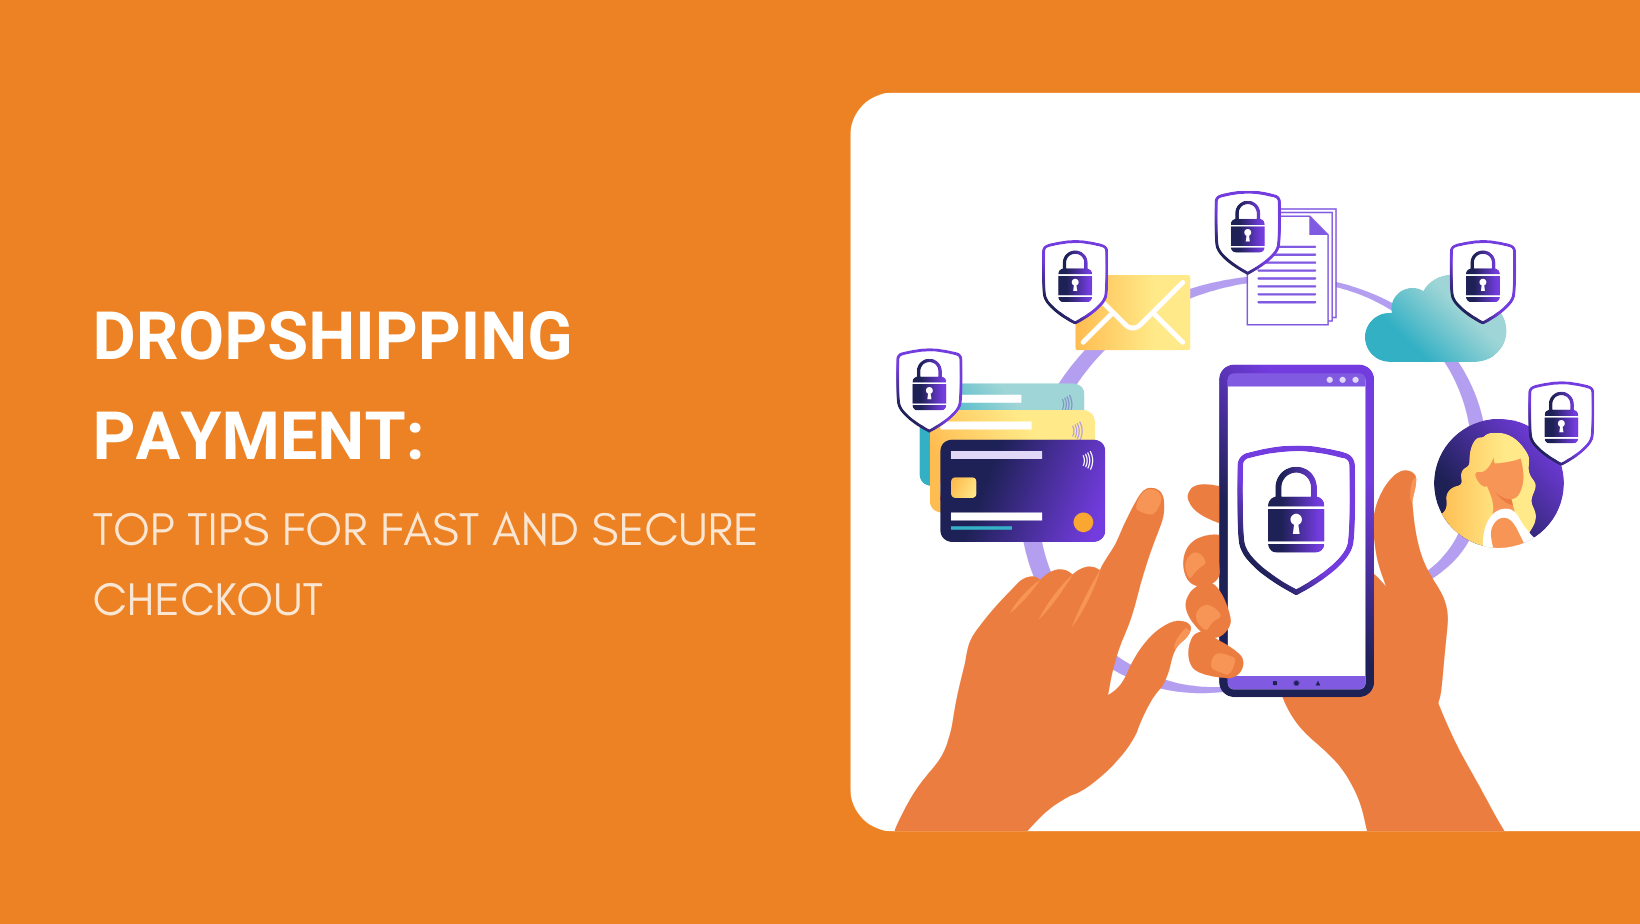 DROPSHIPPING PAYMENT TOP TIPS FOR FAST AND SECURE CHECKOUT